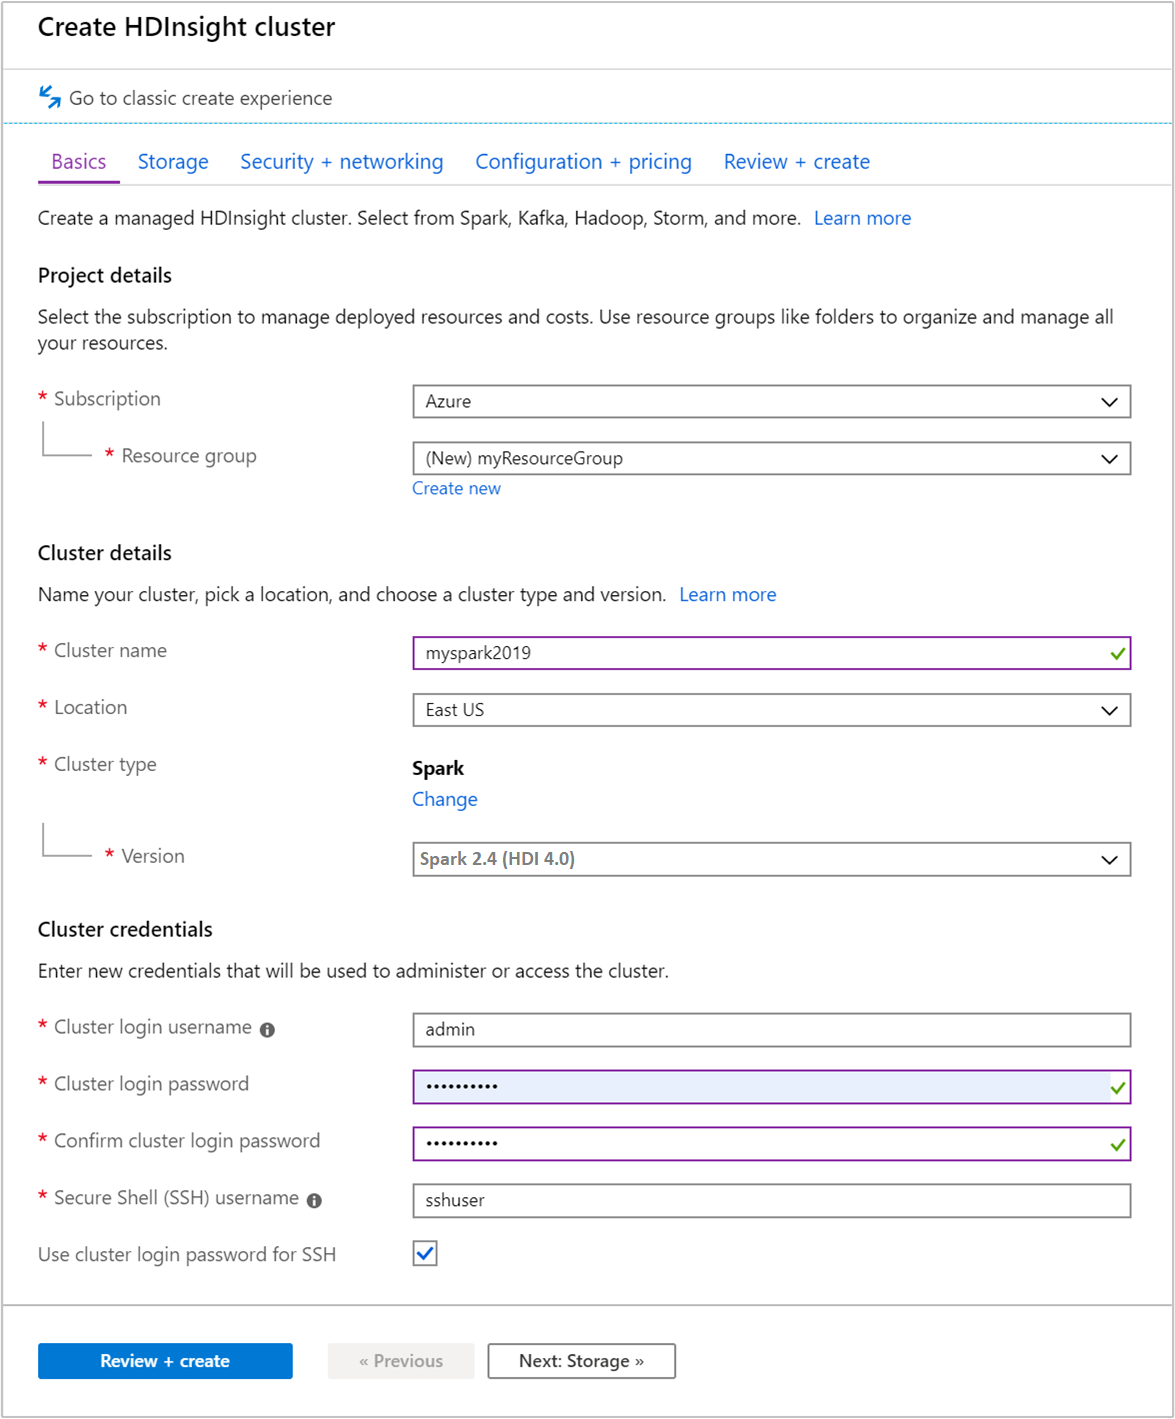 A screenshot of the basic tab in the Create AzureHDInsight Cluster screen in the Azure portal